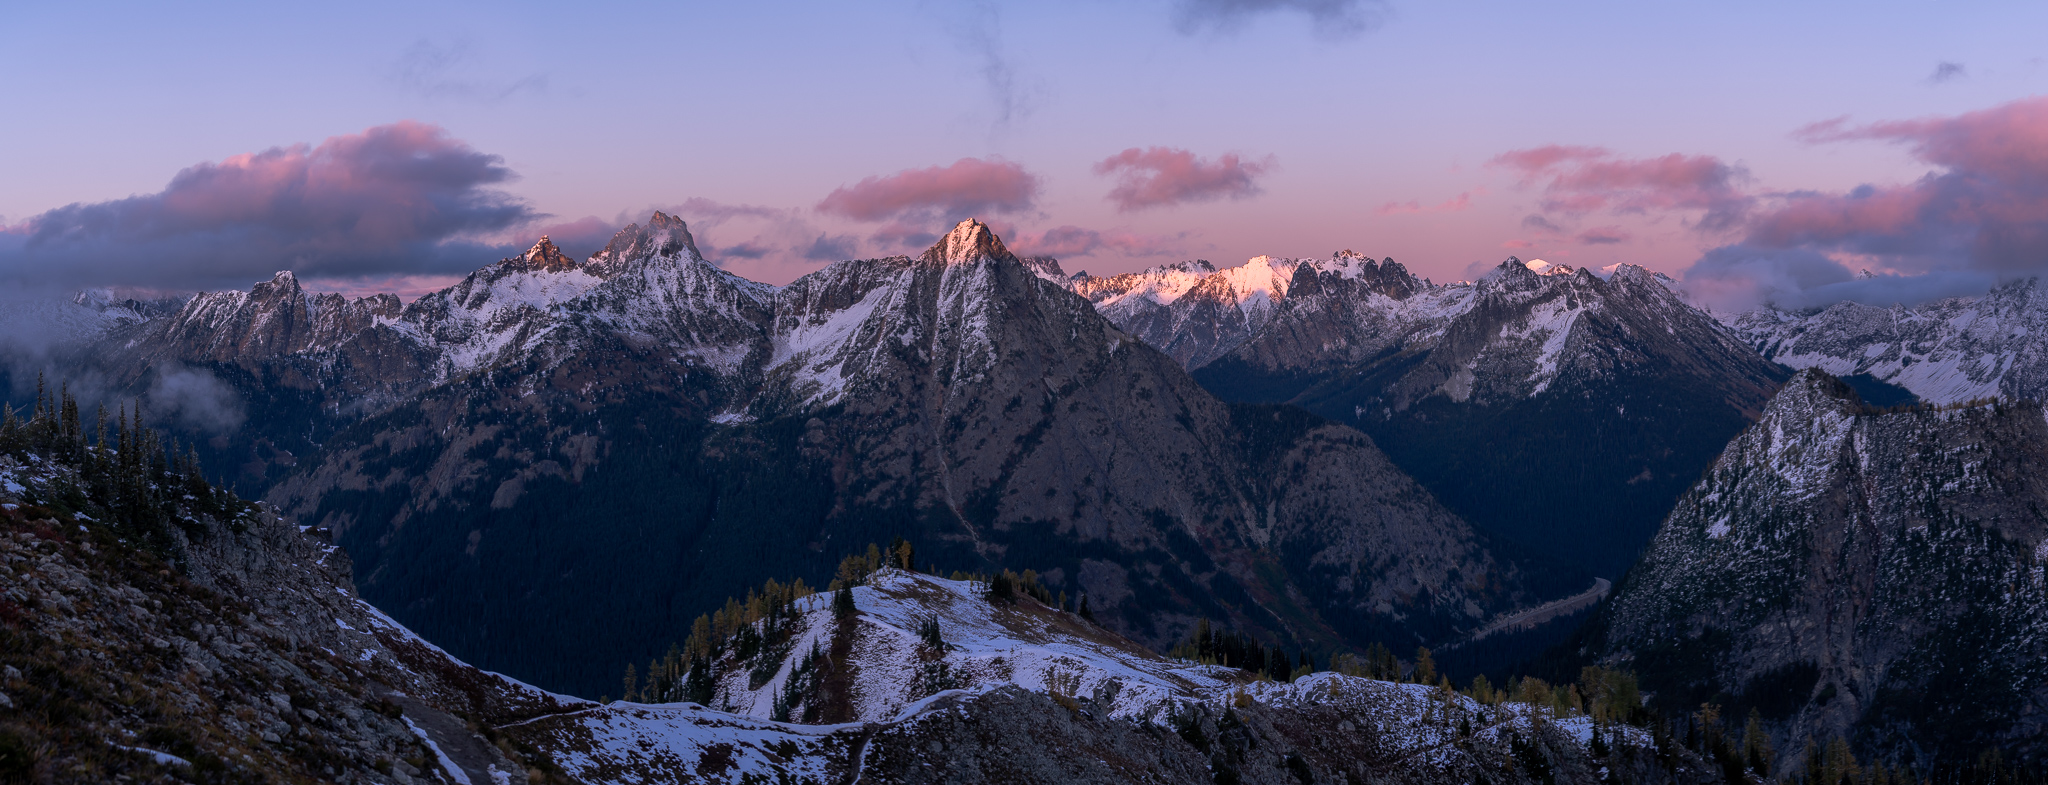 Panoramic Image during a colorful sunset, Maple Pass Trail